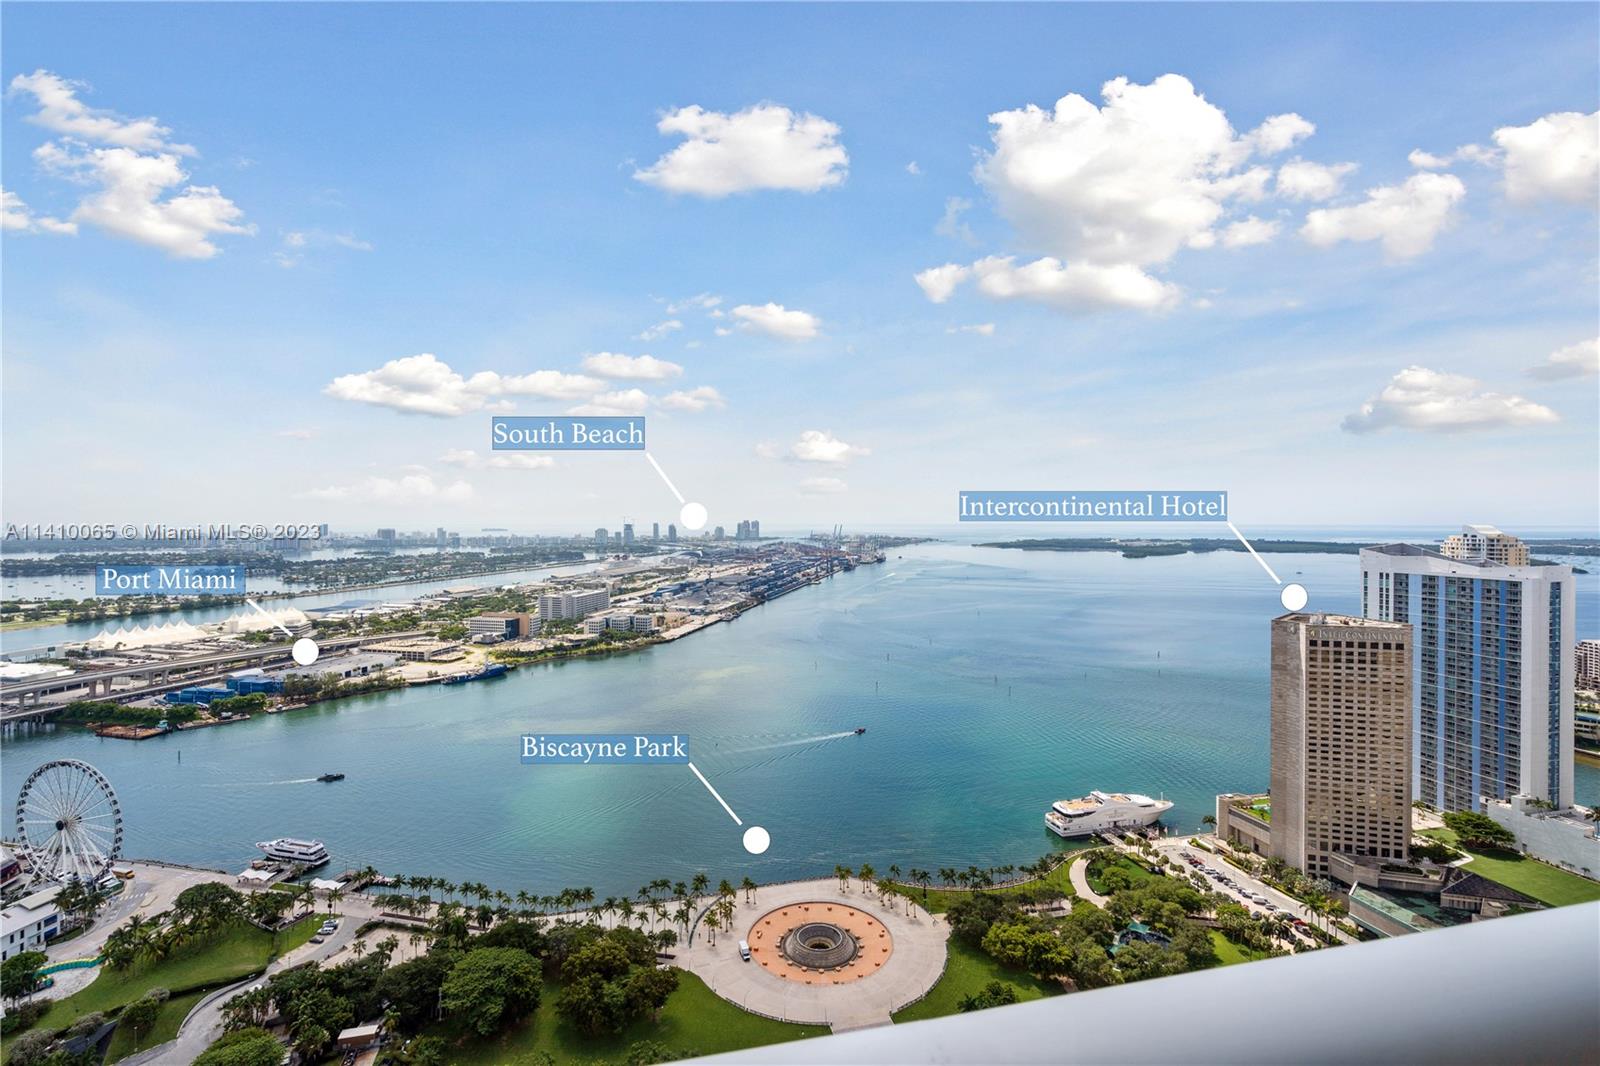 Seller financing offered at 4.99% interest.  2 Beds PLUS den (easily converted to 3 Beds). 52nd floor unit w/ amazing unobstructed views to cruise ships, Biscayne Bay, evening skyline & sunrise! Located directly across from Bayfront Park, w/ walking access to trains (Metromover, Metro Rail, Brightline, and soon-to-be Tri-Rail).  15mins drive to Miami Intl Airport (or take the train), & 5mins drive to Port of Miami.   This spectacular condo has amazing 1st class amenities that include Olympic-size heated pool, a state-of-the-art spa, a fitness center, security, valet parking & concierge service. Easy walk to Miami Heat & other world-class performances at the Kaseya Center Arena (formerly AAA).  Even the Waldorf Astoria has chosen this neighborhood for its next masterpiece.